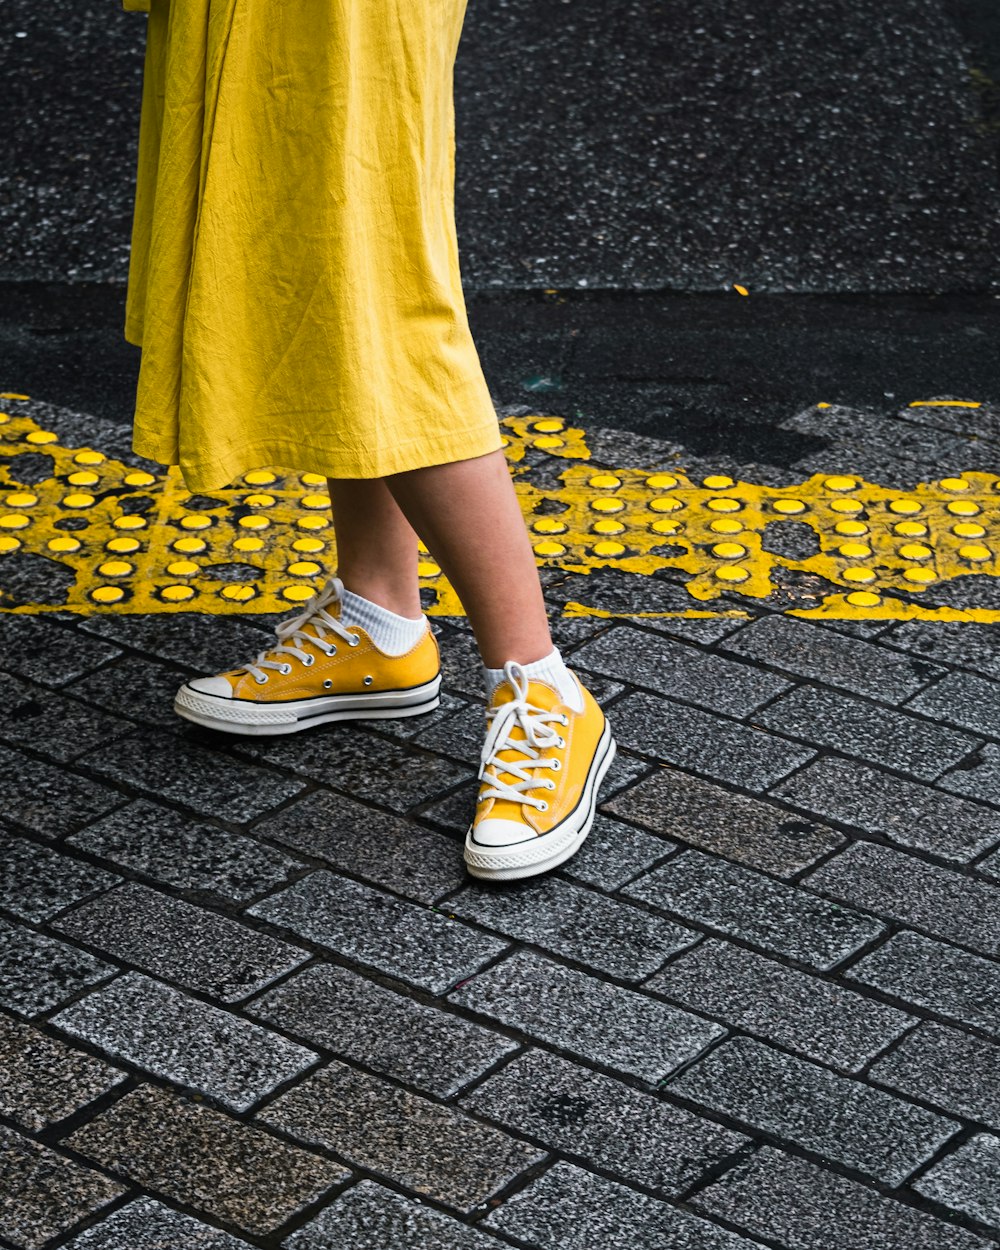 person wearing yellow maxi dress and yellow Converse low-top sneaker photo  – Free Converse Image on Unsplash